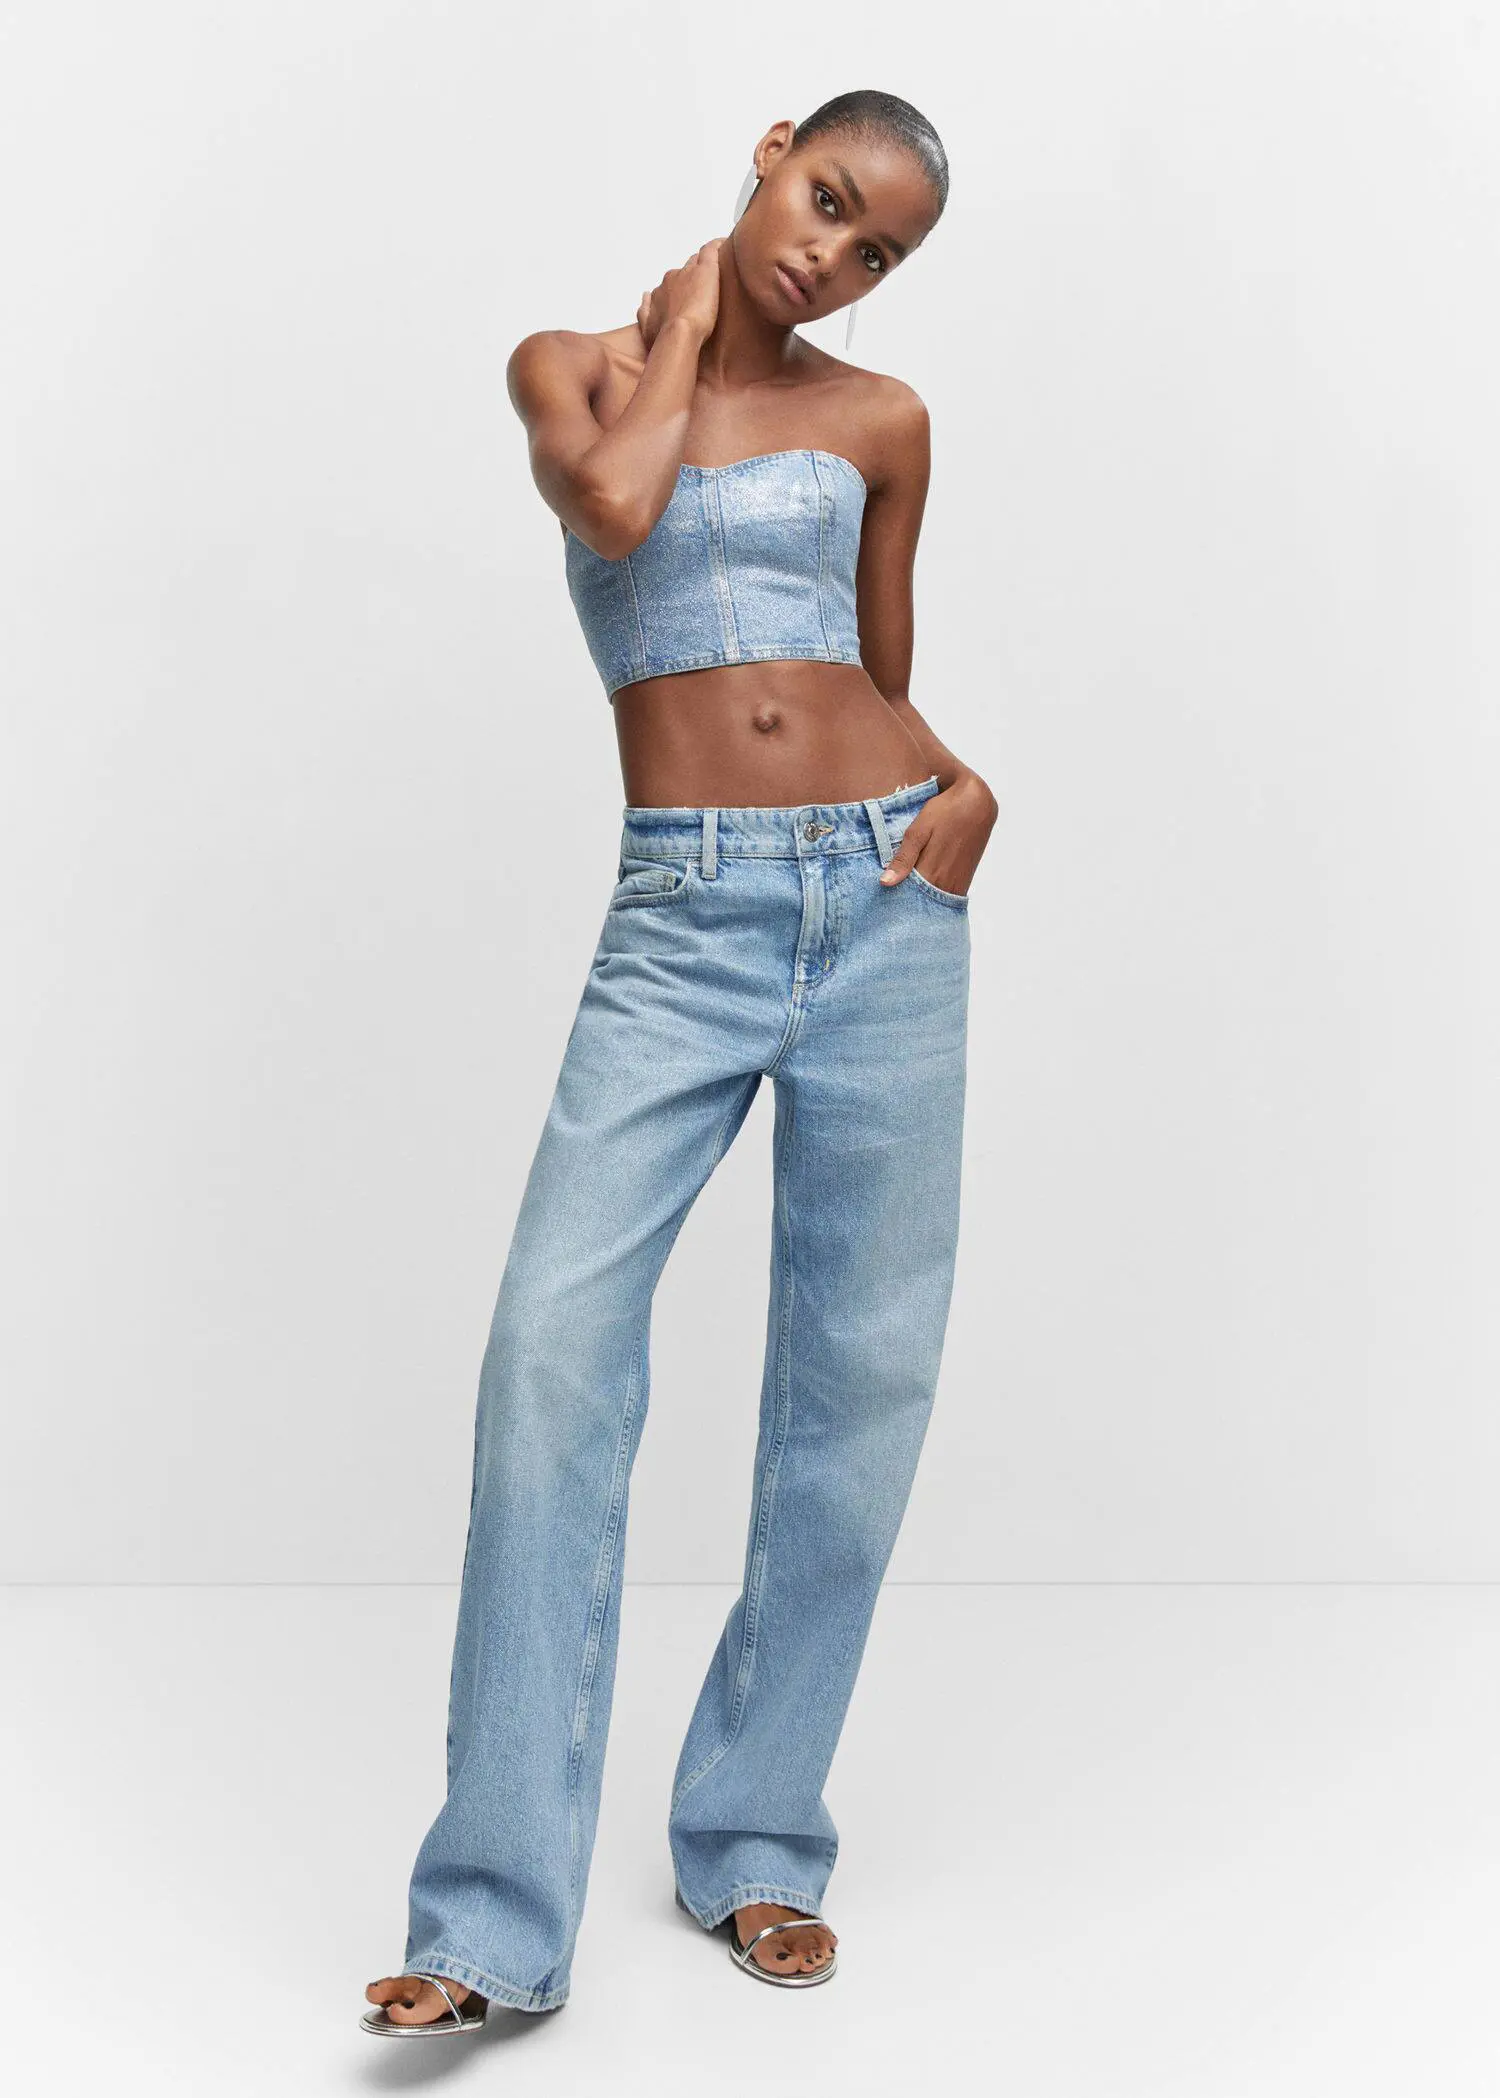 Mango Denim glitter corset top. a woman in a strapless top and high-waisted jeans 